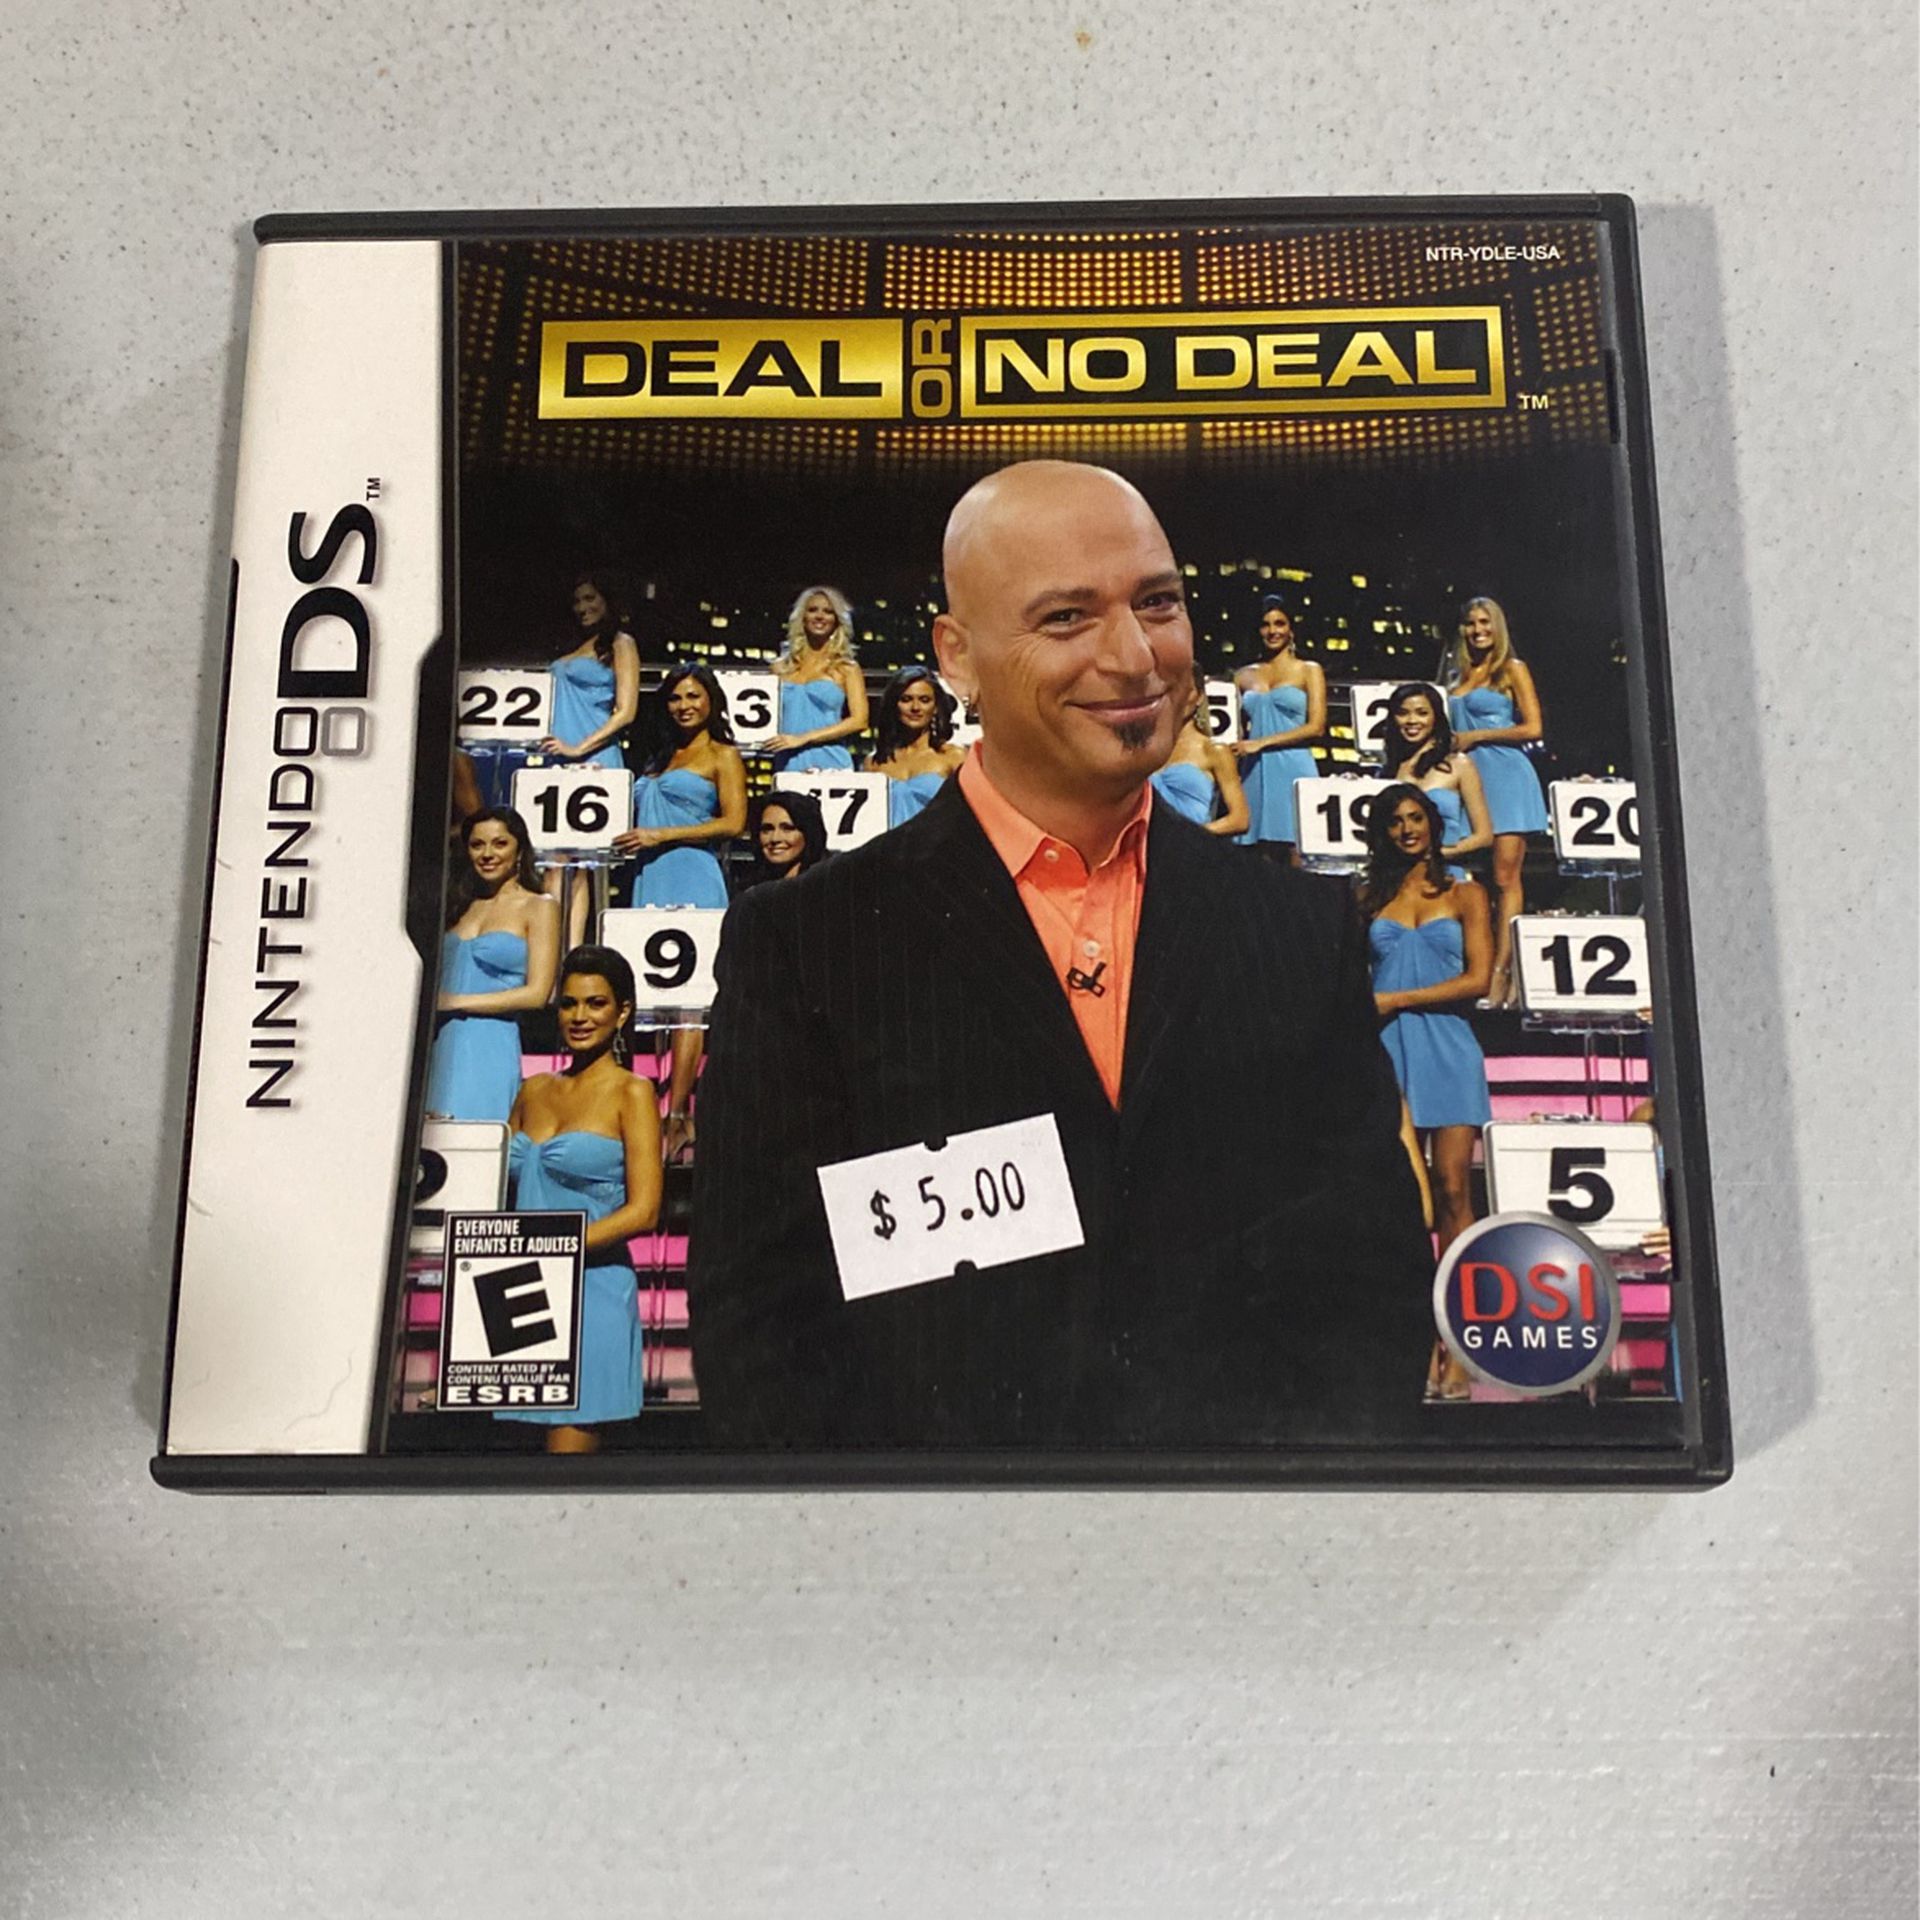 Deal or No Deal (Nintendo DS, 2007) COMPLETE